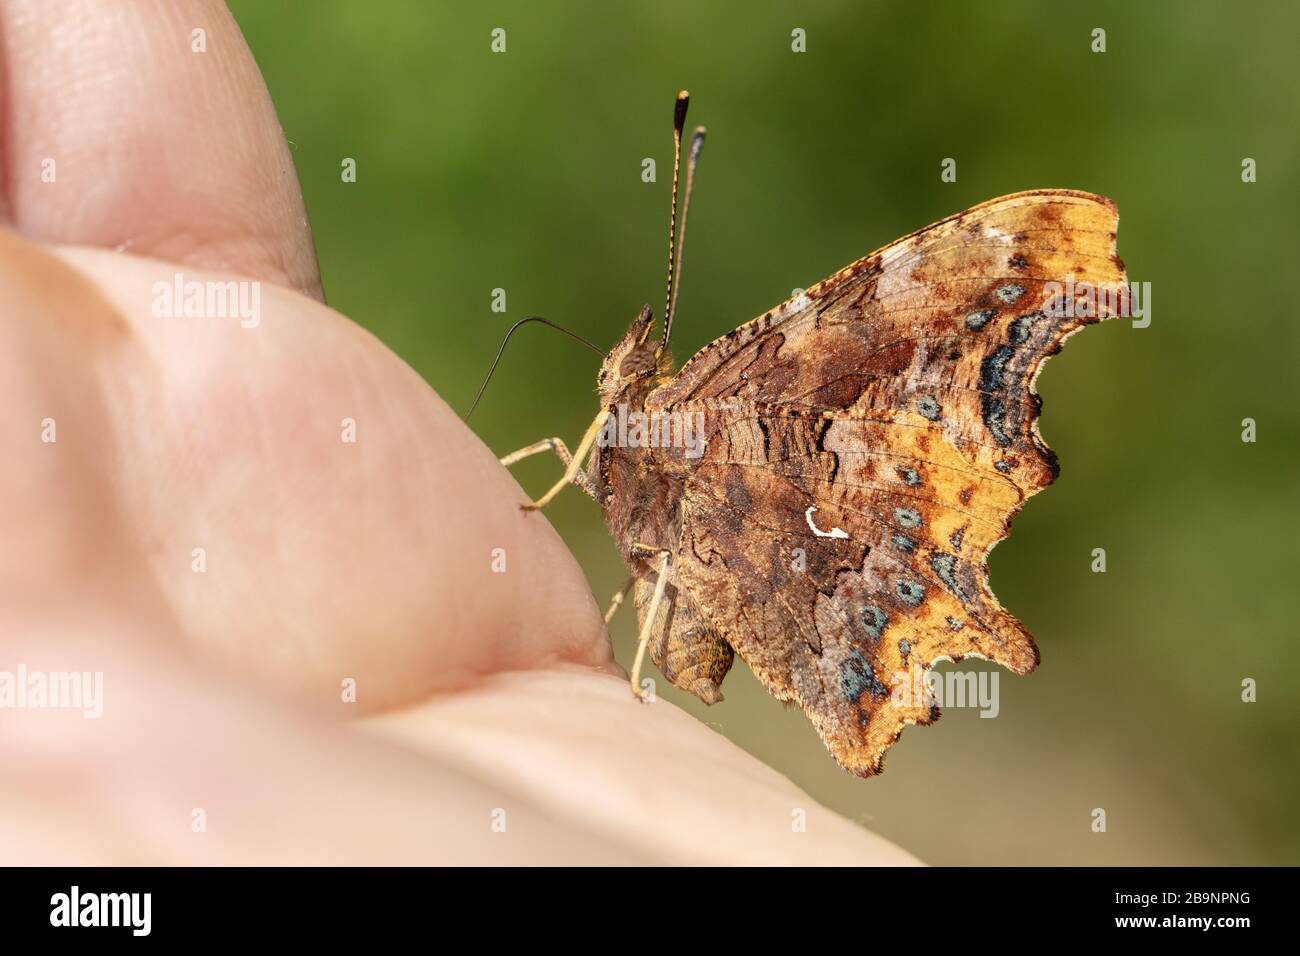 Comma butterfly (Polygonia c-album) resting on a hand Stock Photo